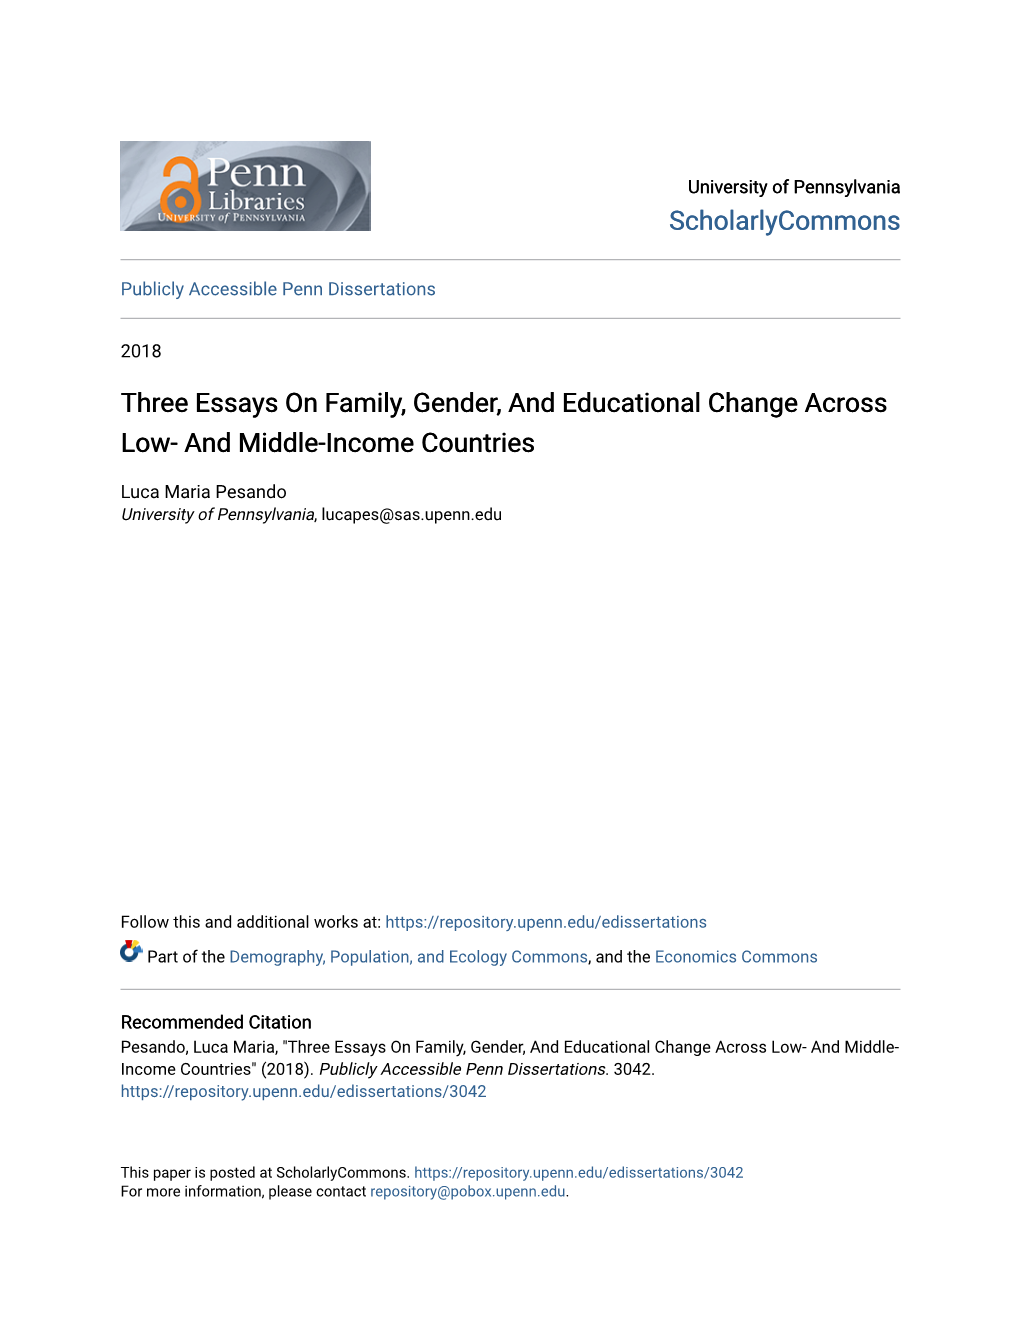 Three Essays on Family, Gender, and Educational Change Across Low- and Middle-Income Countries